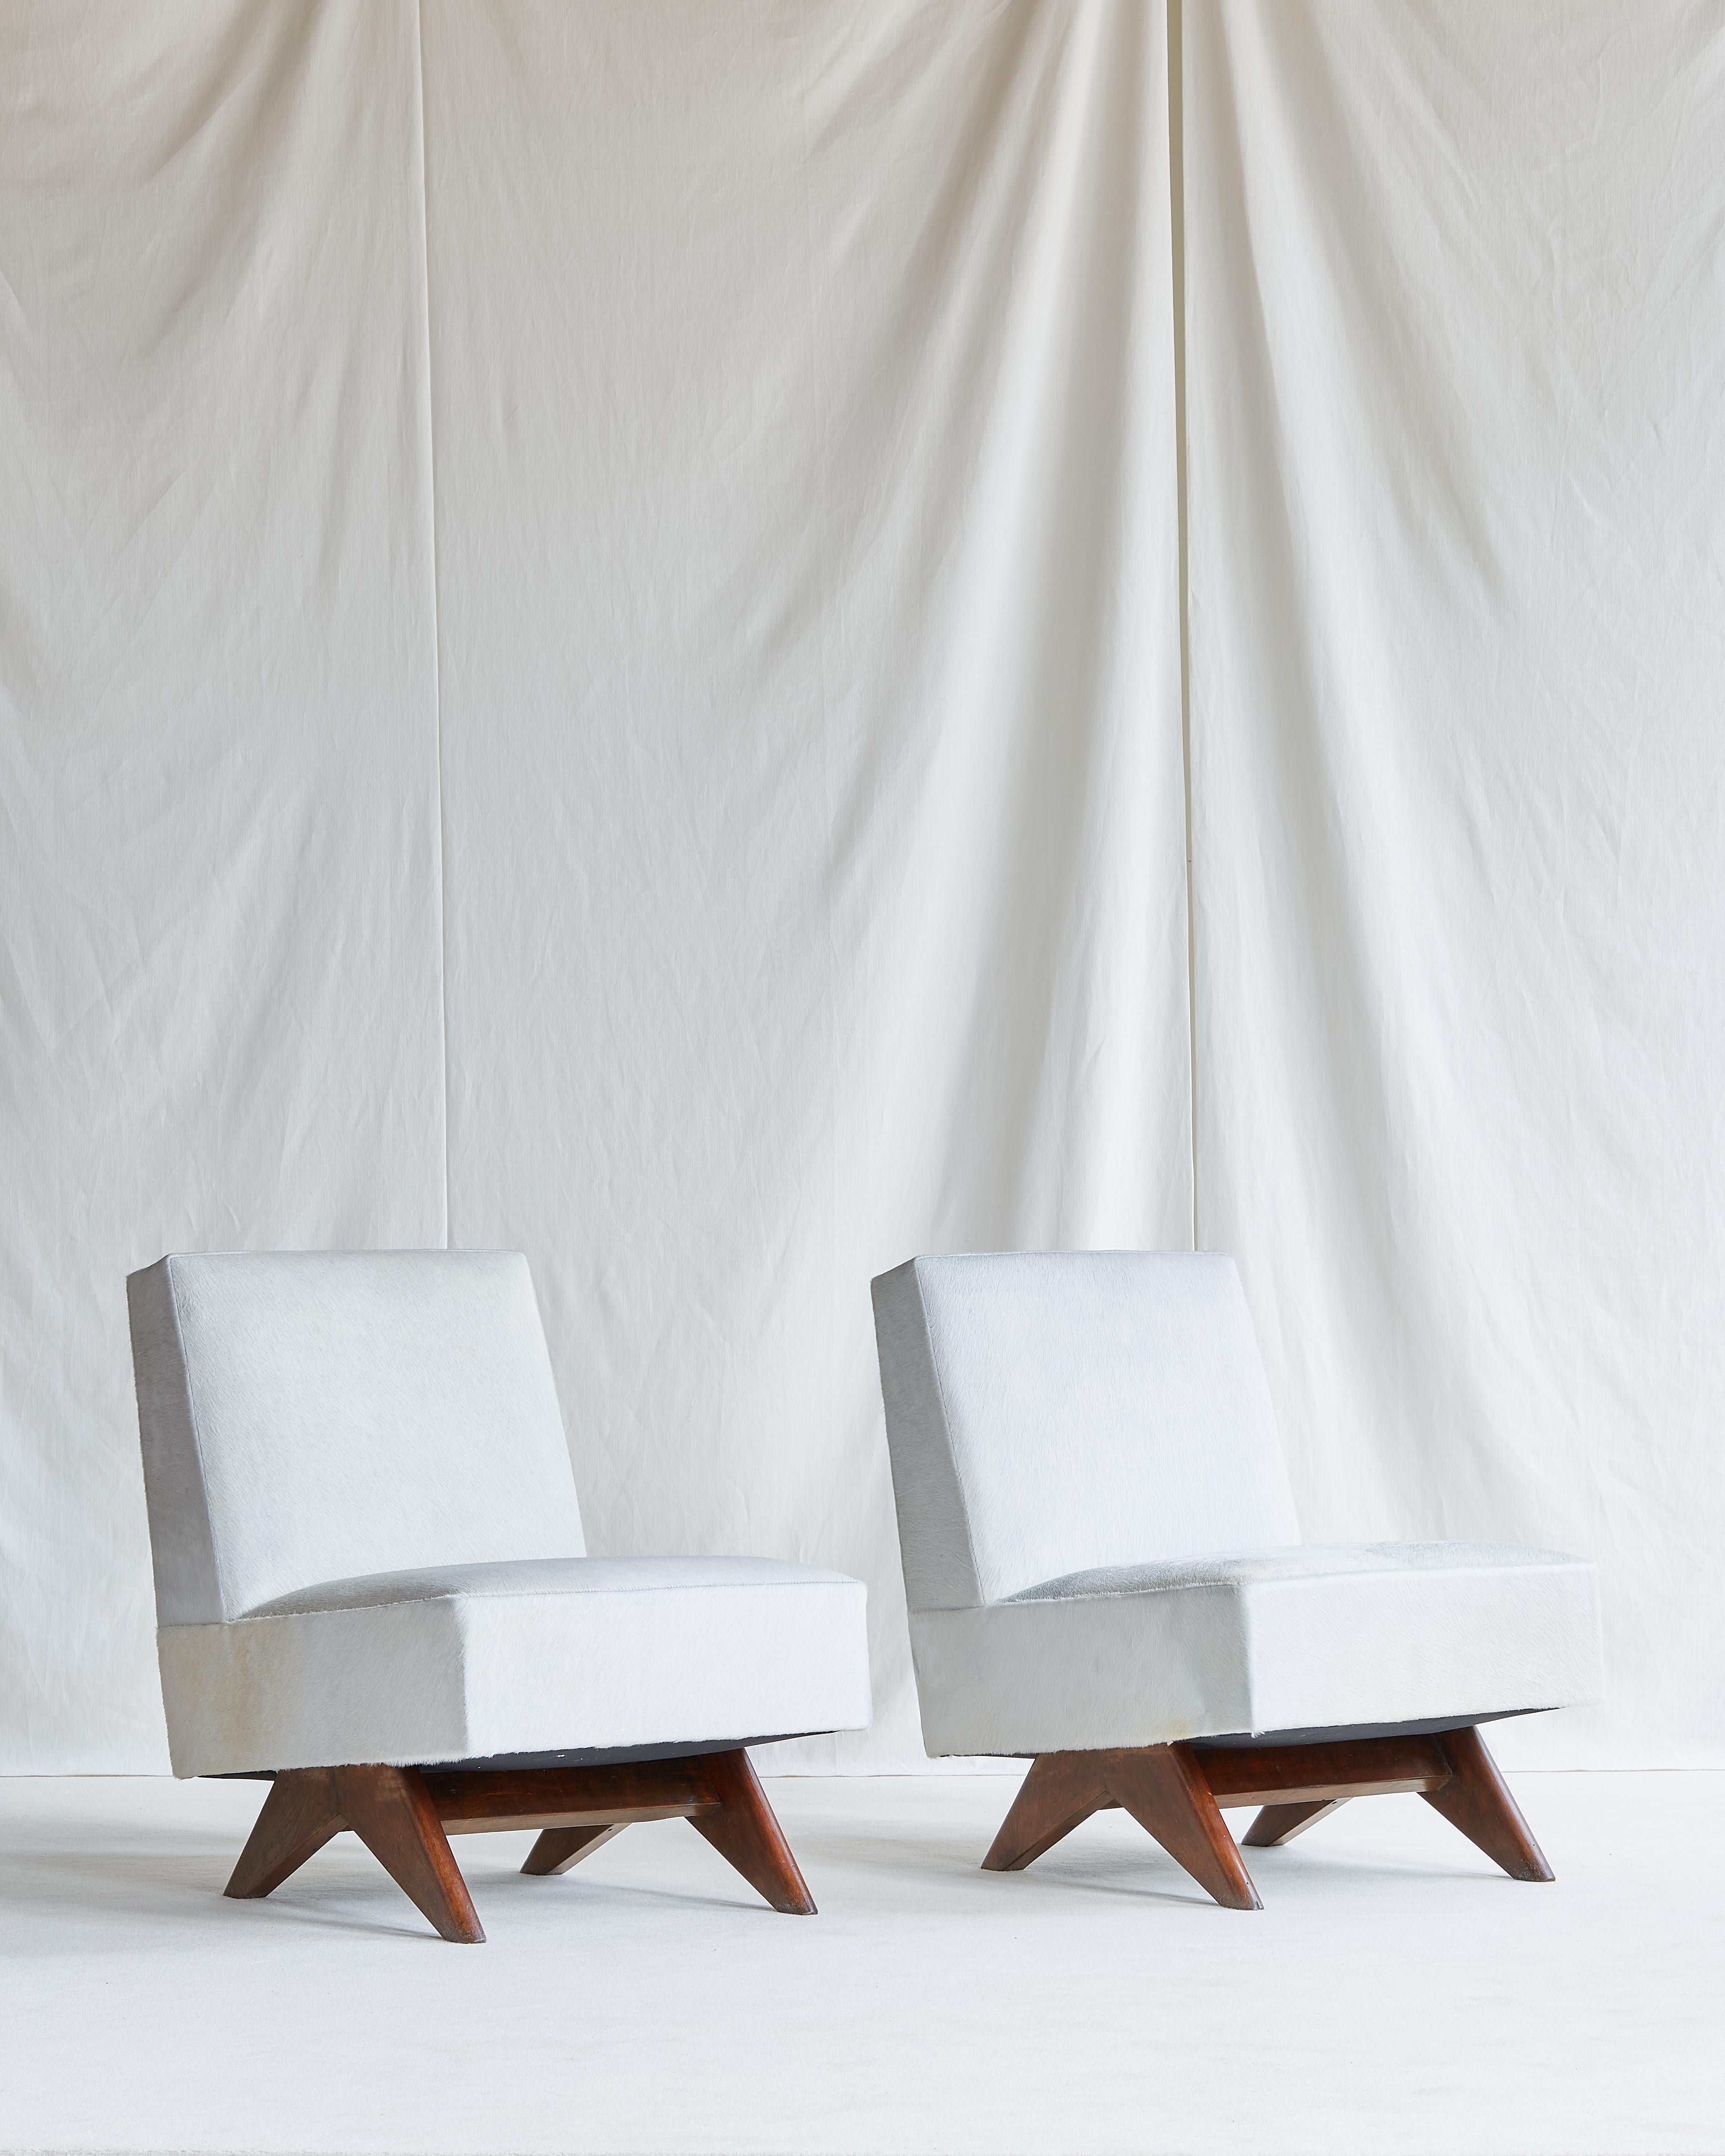 Rare pair of Pierre Jeanneret low upholstered lounge chairs with low inverted compass type leg.

High Court of Chandigarh c. 1955-1956

Upholstered in Italian sheared white cow hide. Seat interior has been completely refurbished, all springs